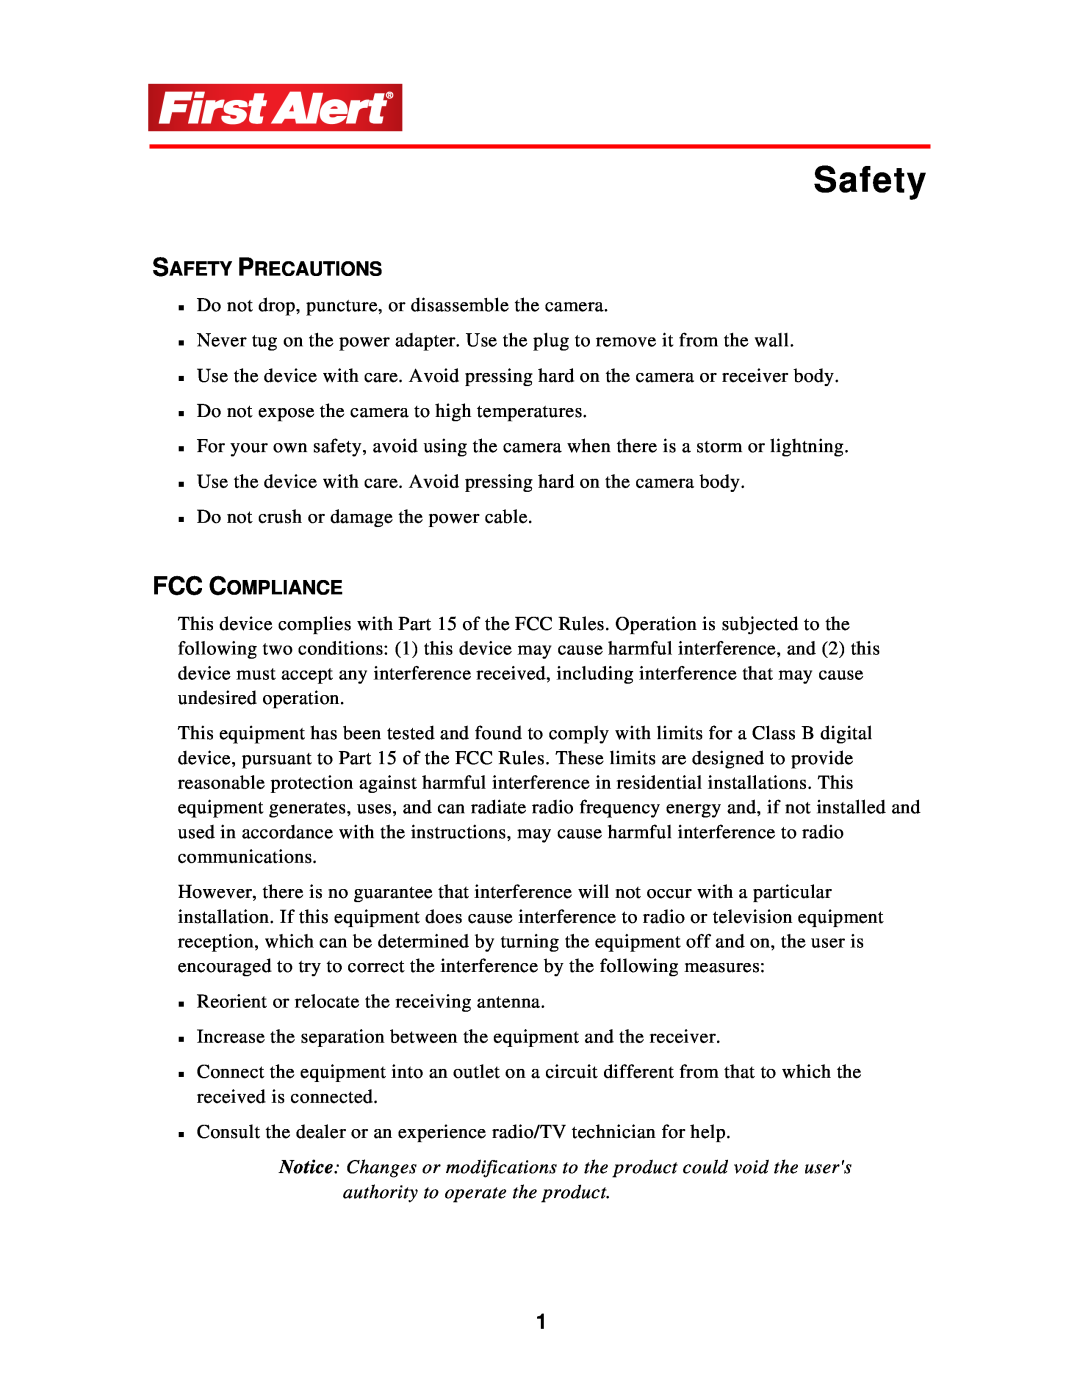 First Alert D575 user manual Safety Precautions, Fcc Compliance 